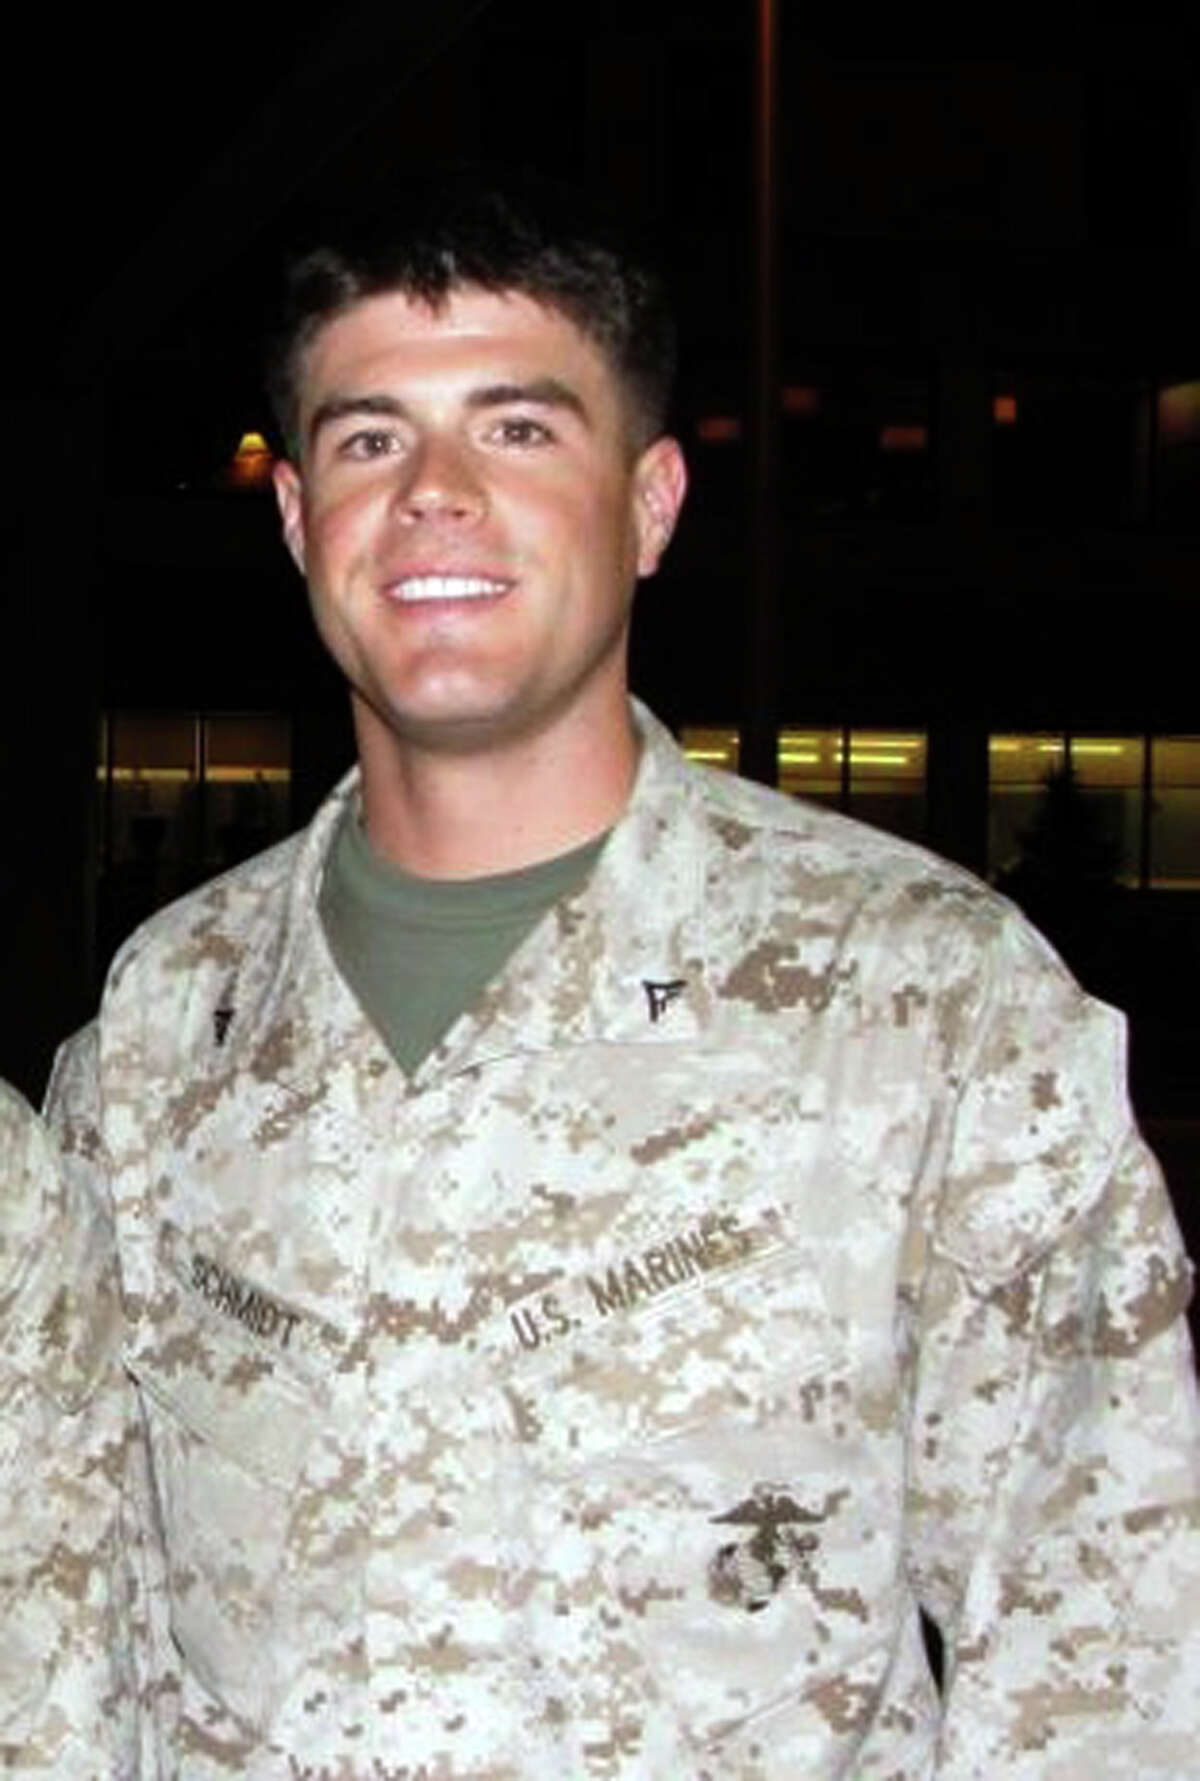 Marine Lance Cpl. Benjamin Whetstone Schmidt, taken in Maine in Aug. 2011 before he left for his second tour in Afghanistan. Courtesy the family.